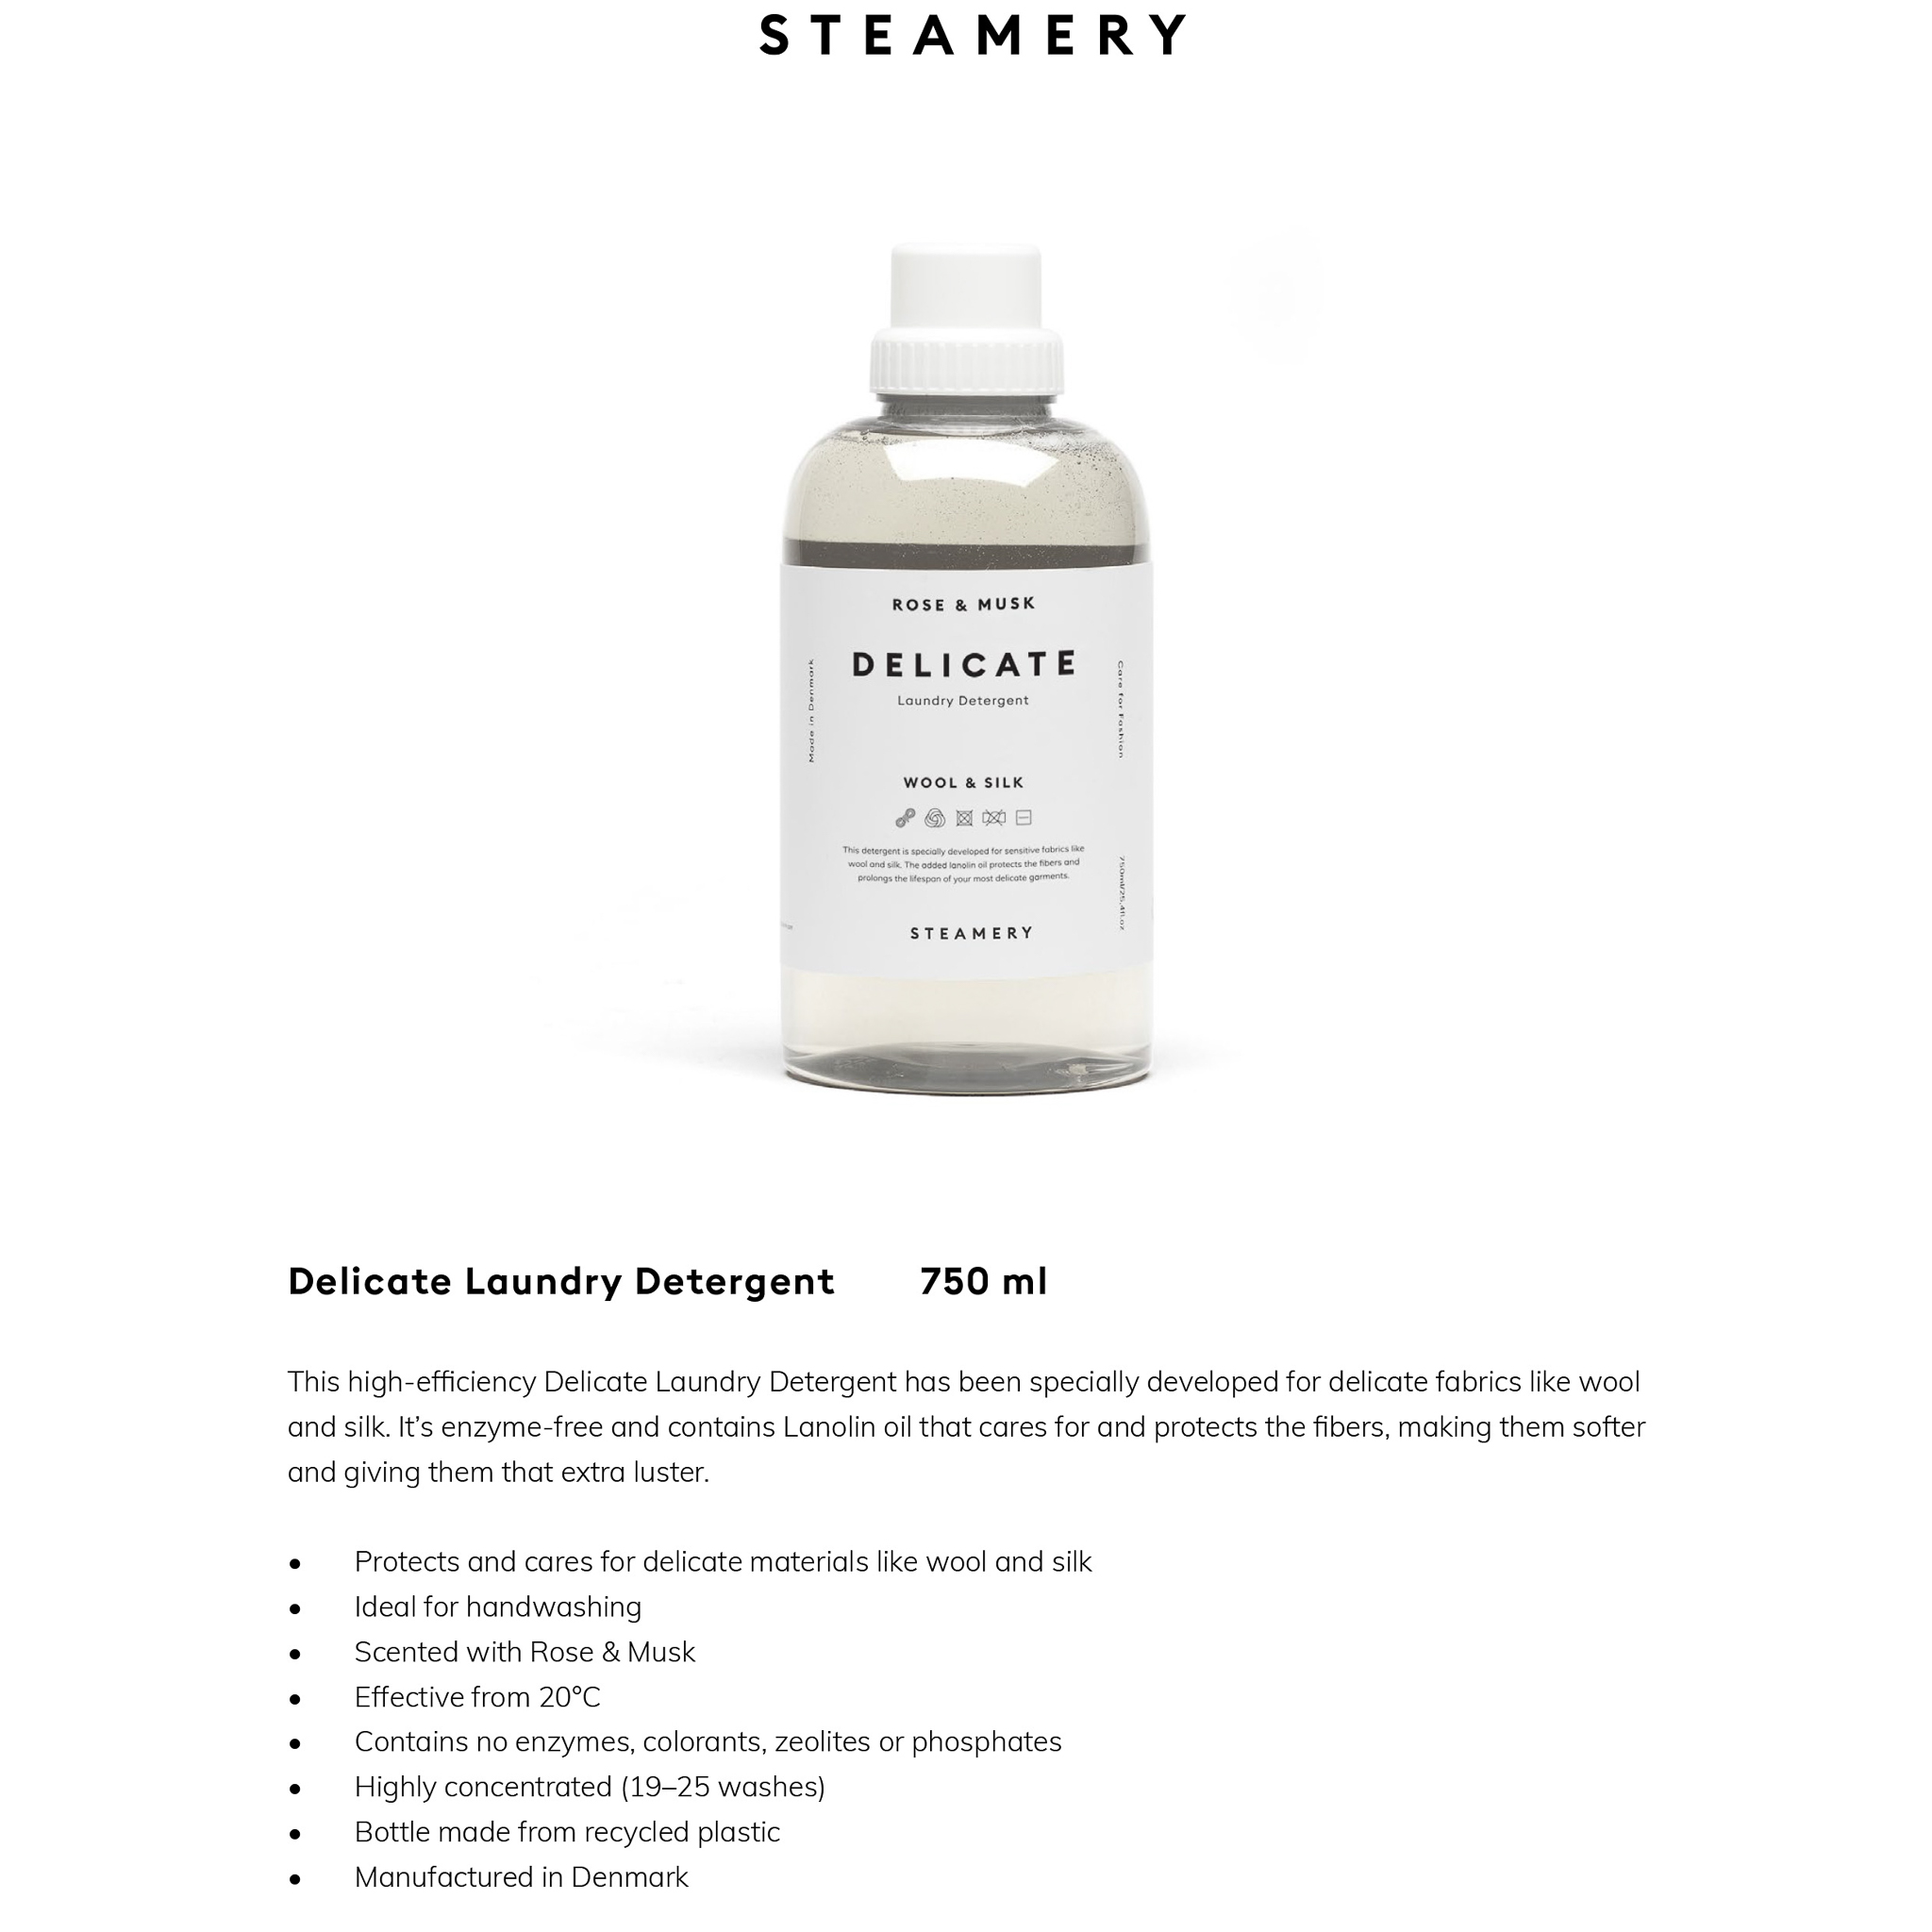 STEAMERY // DELICATE - LAUNDRY DETERGENT